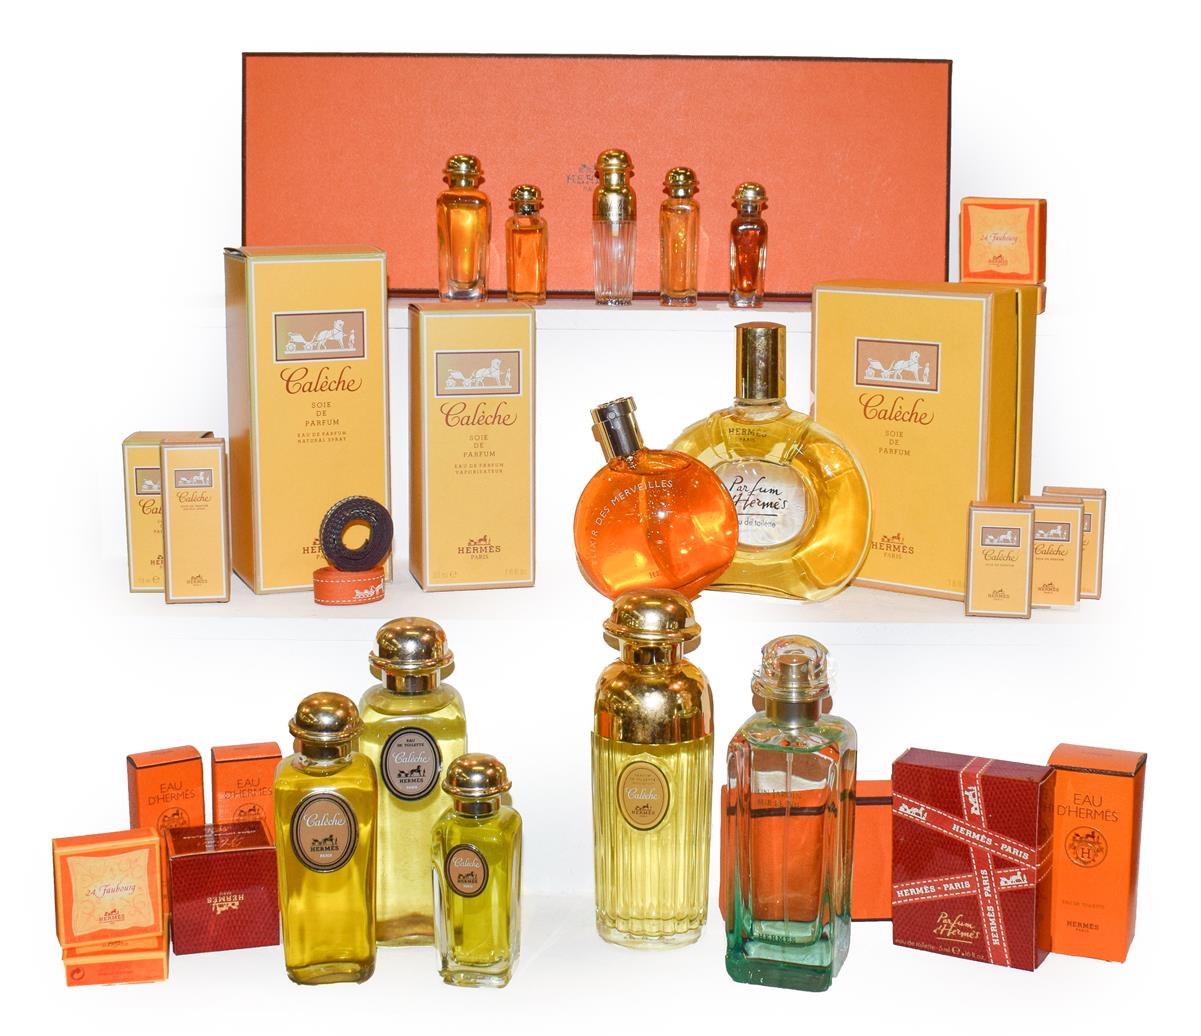 Lot 16 - Assorted Hermes dummy factices and scent bottles, some boxed including Caleche, 24 Fauborg,...